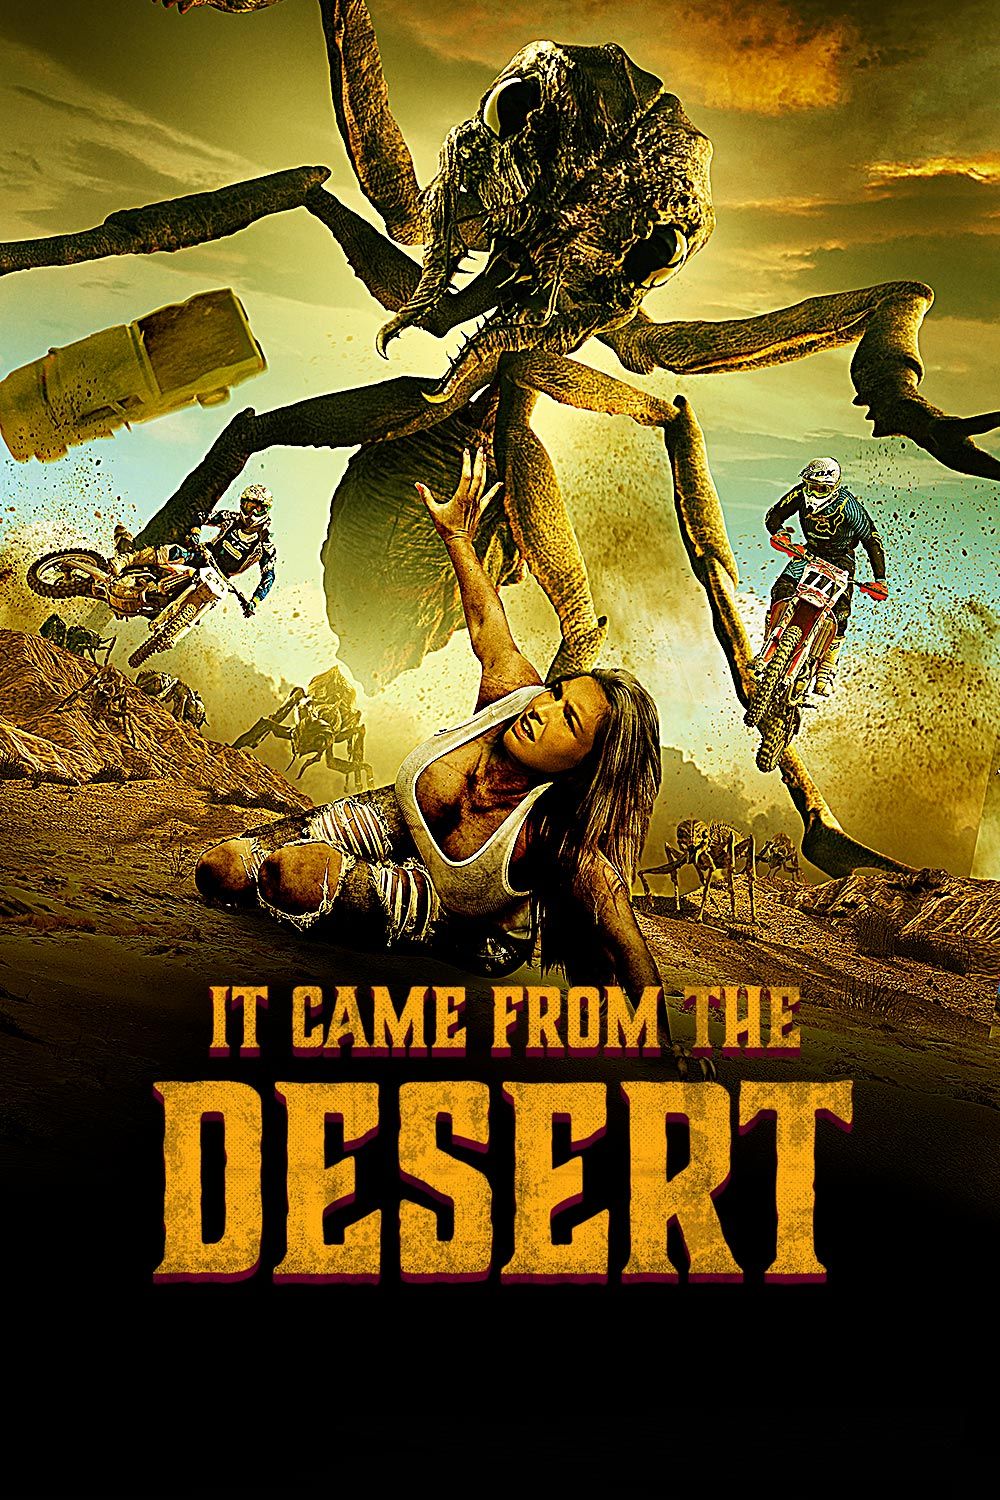 Watch It Came From The Desert Online